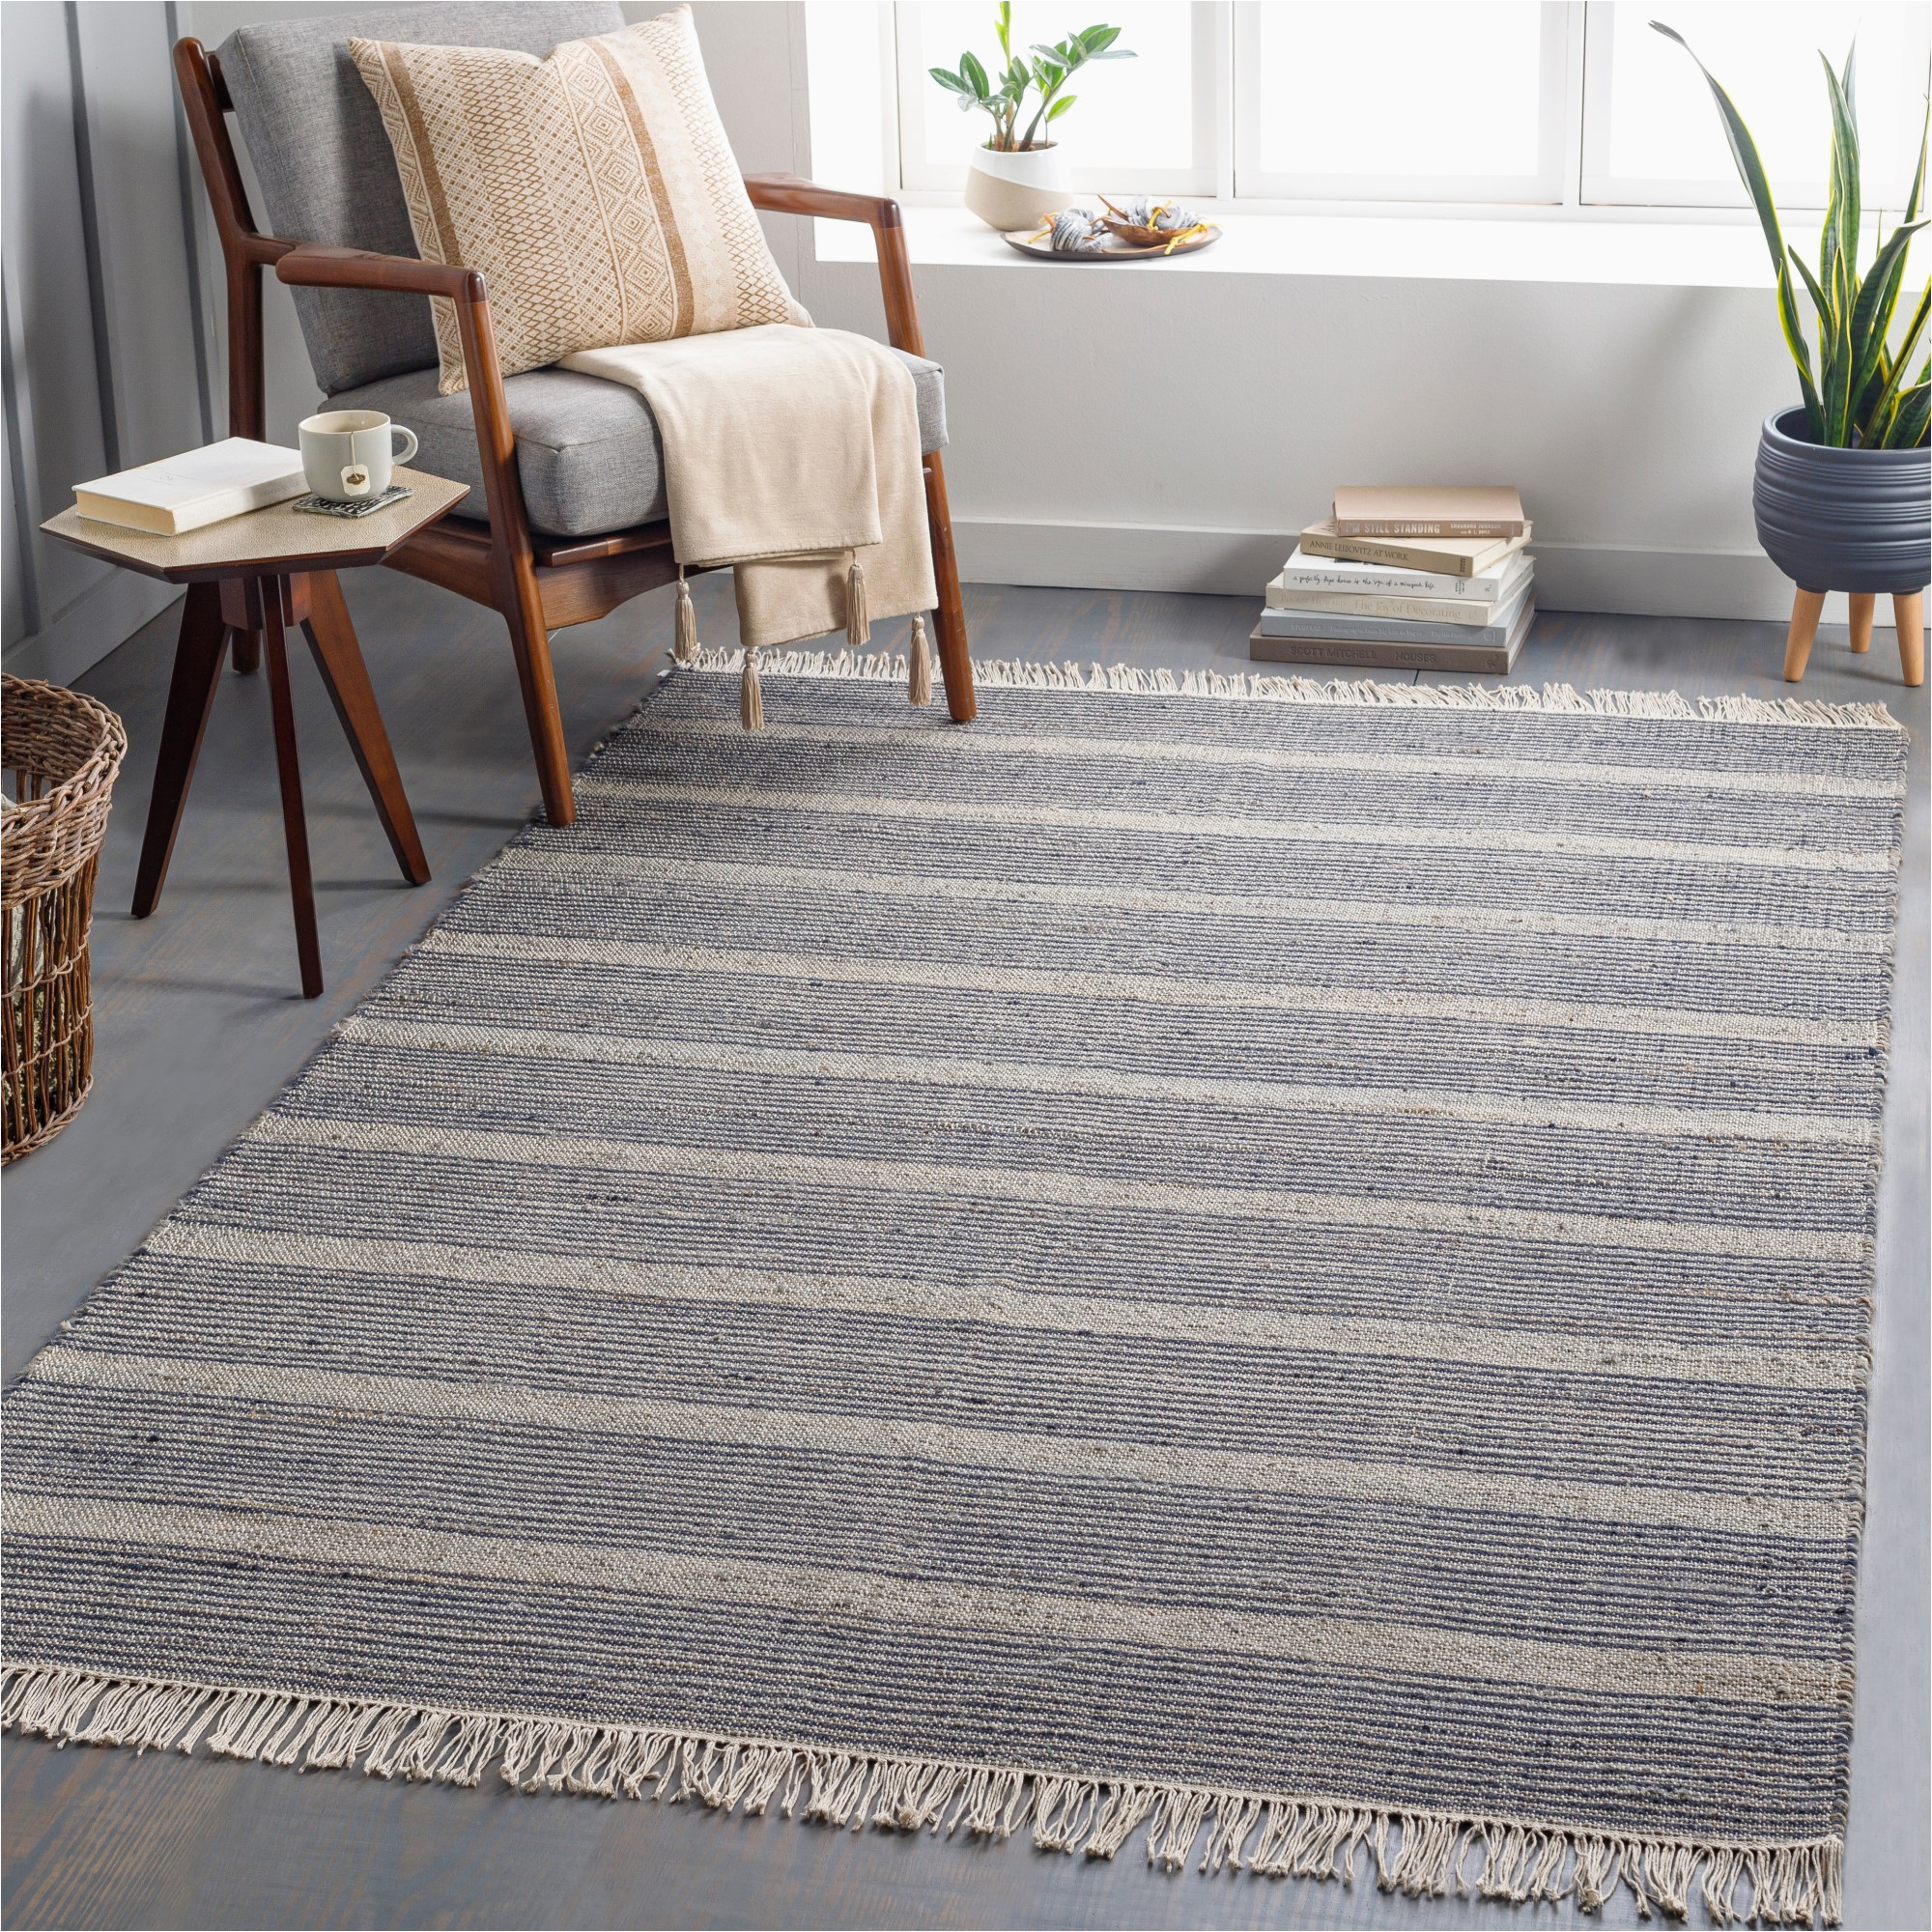 Scott Living Transform 4 area and Accent Rug Surya Trabzon 30340 area Rugs Jute Striped Rectangular Blues …